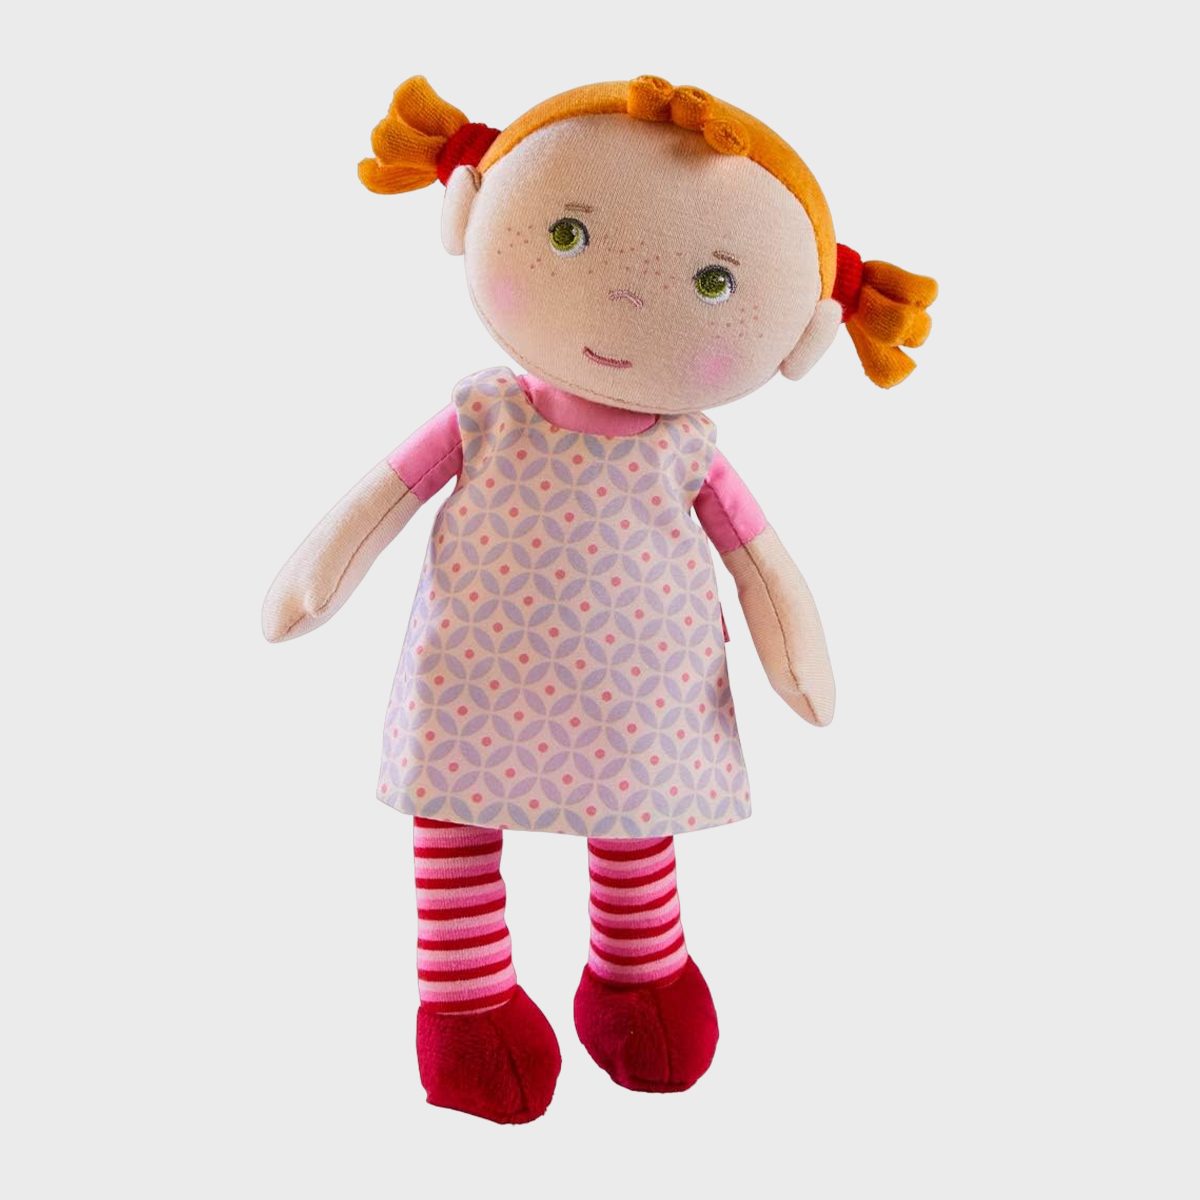 <p>This cuddly <a href="https://www.amazon.com/HABA-Snug-Roya-Embroidered-Removable/dp/B07CCFRZFS" rel="noopener noreferrer">dolly</a> is the perfect size for little hands. Her soft body is meant for snuggling, and her sweet, embroidered expression and velvety pigtails make her super lovable. There are no tiny pieces like plastic eyes or buttons that pop off which makes her a wonderful first doll for little girls.</p> <p class="listicle-page__cta-button-shop"><a class="shop-btn" href="https://www.amazon.com/HABA-Snug-Roya-Embroidered-Removable/dp/B07CCFRZFS">Shop Now</a></p>